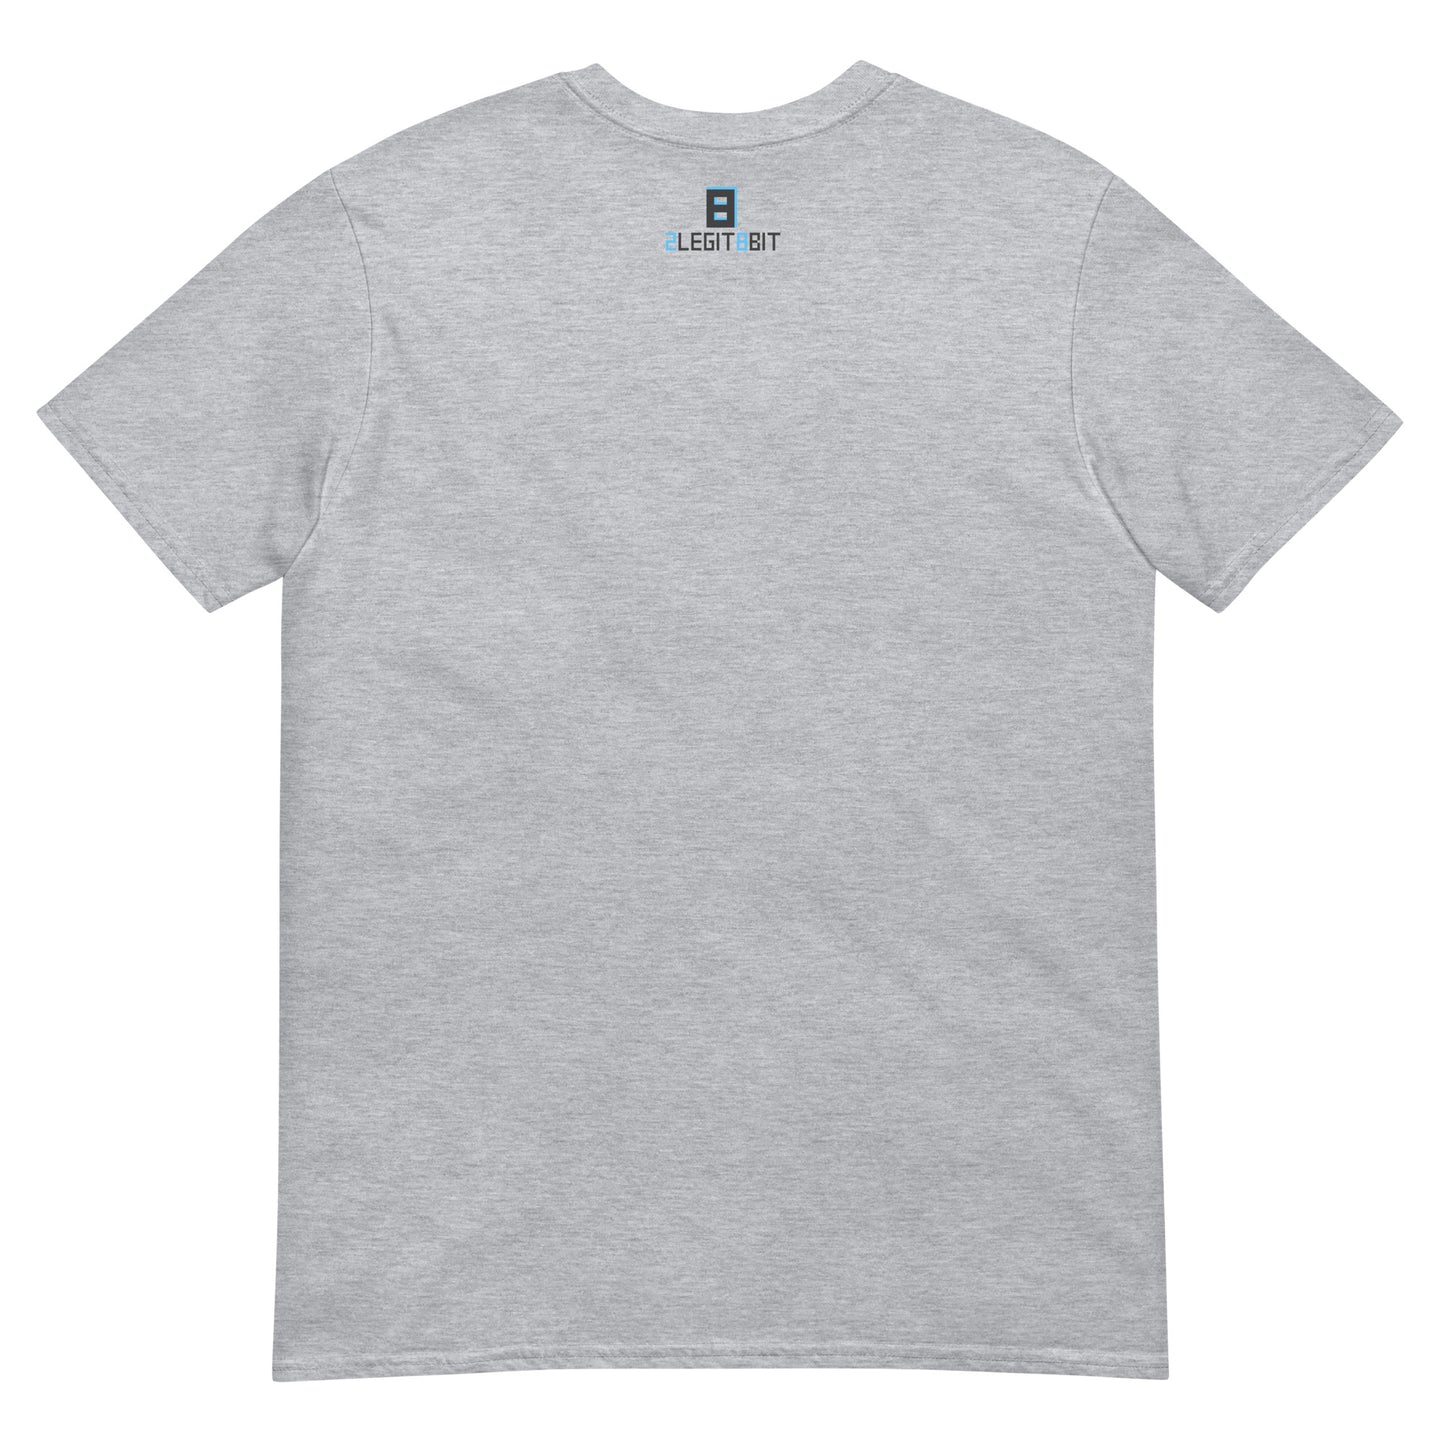 Hilliard Darby Panthers Short-Sleeve Unisex T-Shirt